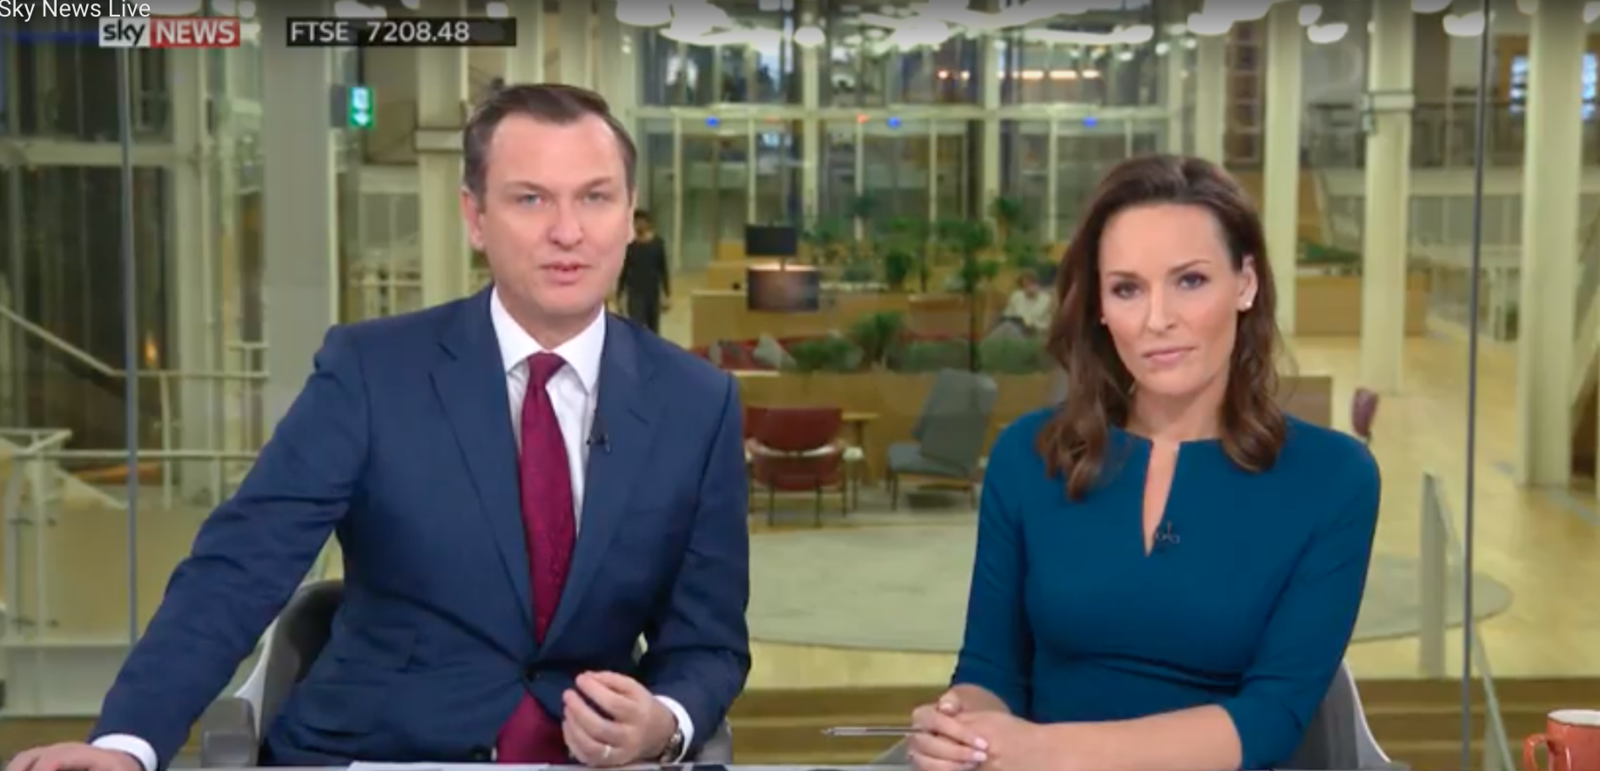 A Sky News Presenter Asked If Drunk Women Deserve To Be Sexually 